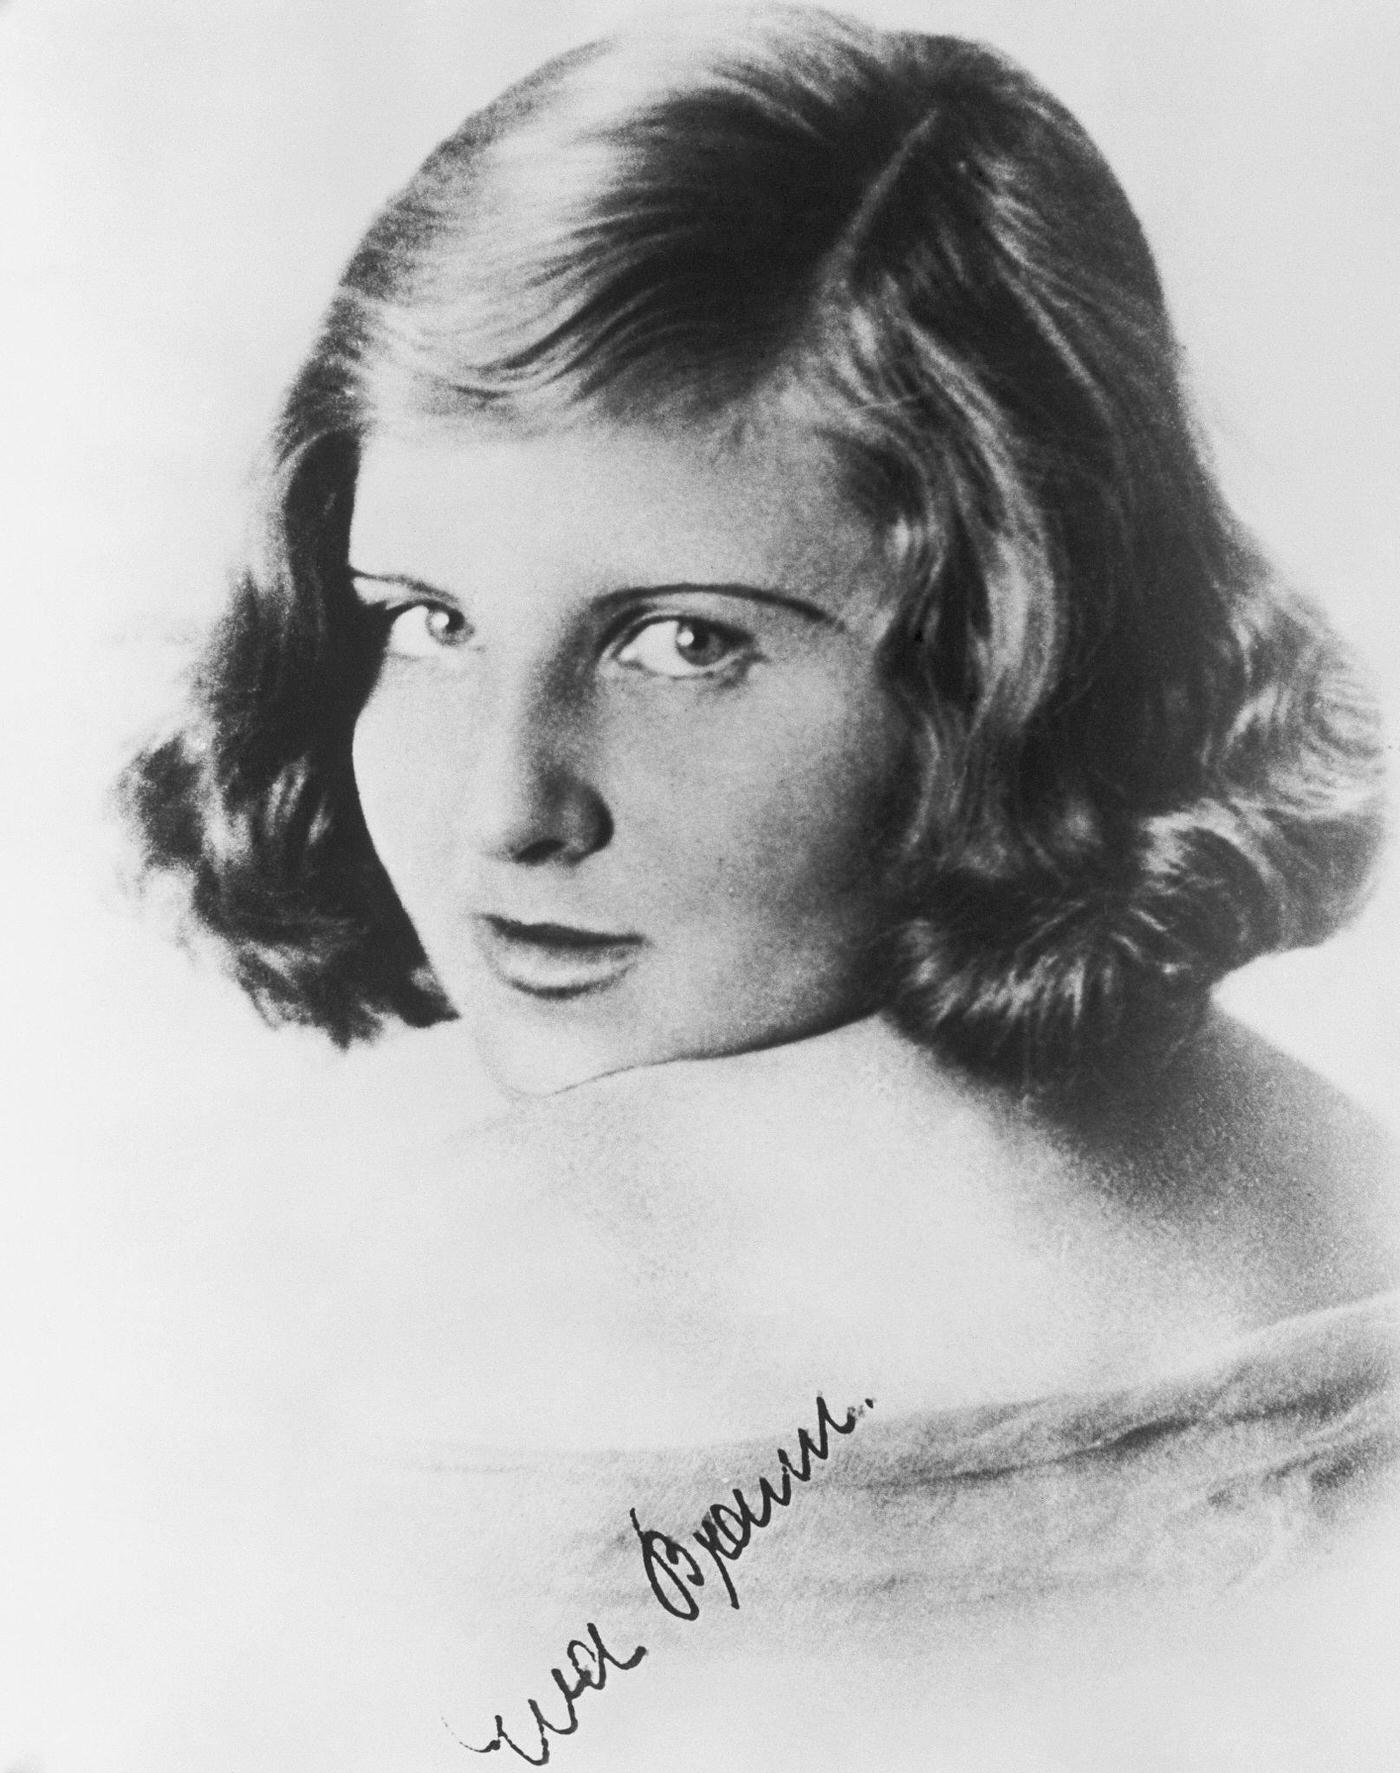 Autographed Photograph of Eva Braun taken from her personal album after her death at the end of World War II